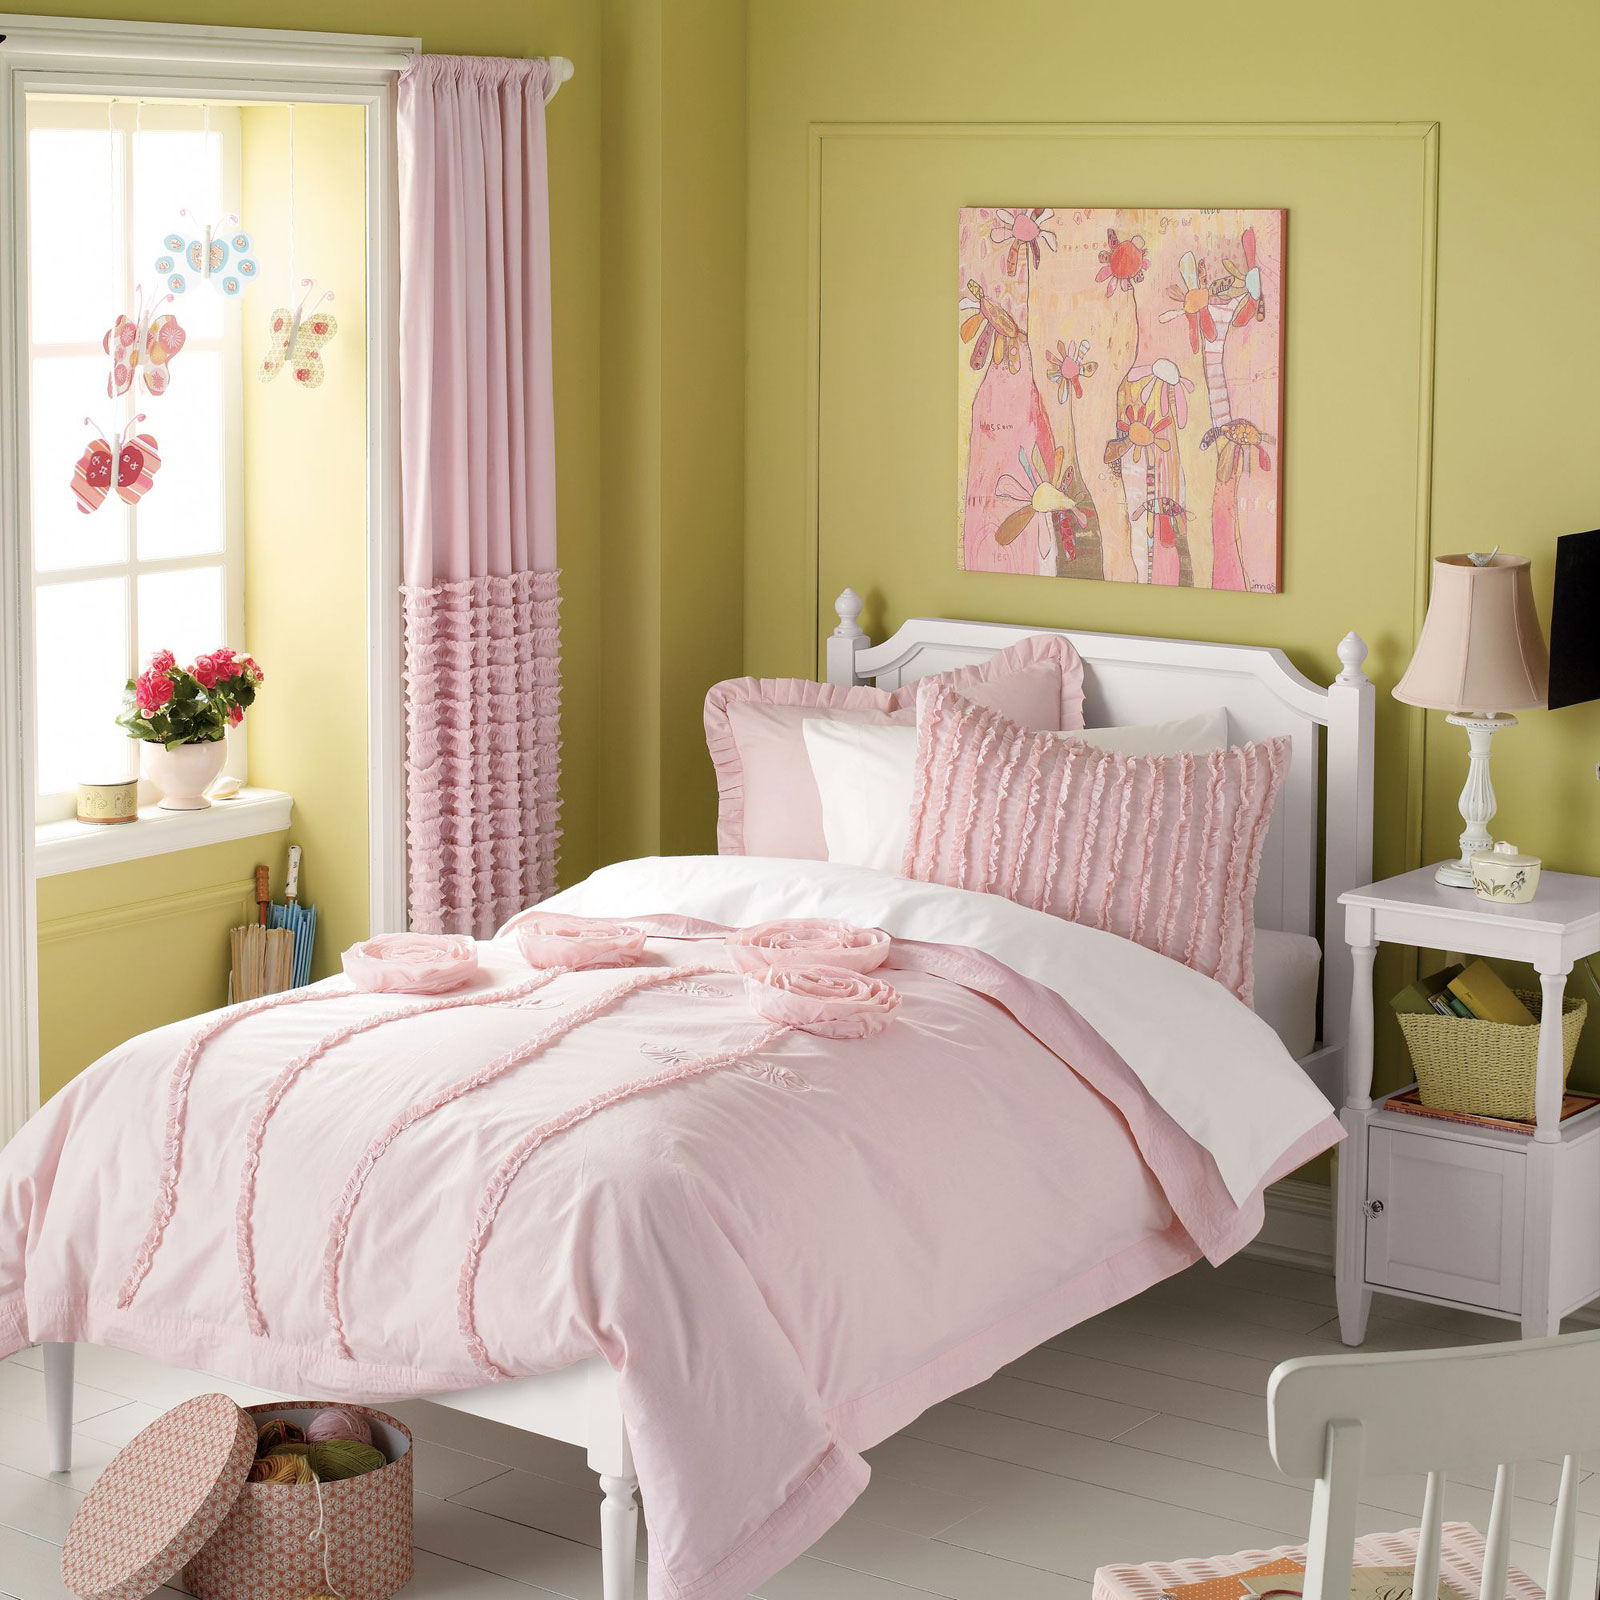 Green Accent Combined Amazing Green Accent Wall Color Combined With Pink Sliding Kids Room Curtains And Matched With White Furniture Of Platform Bed Also Nightstand And Chair Decoration The Better Appearance Through The Kids Room Curtains